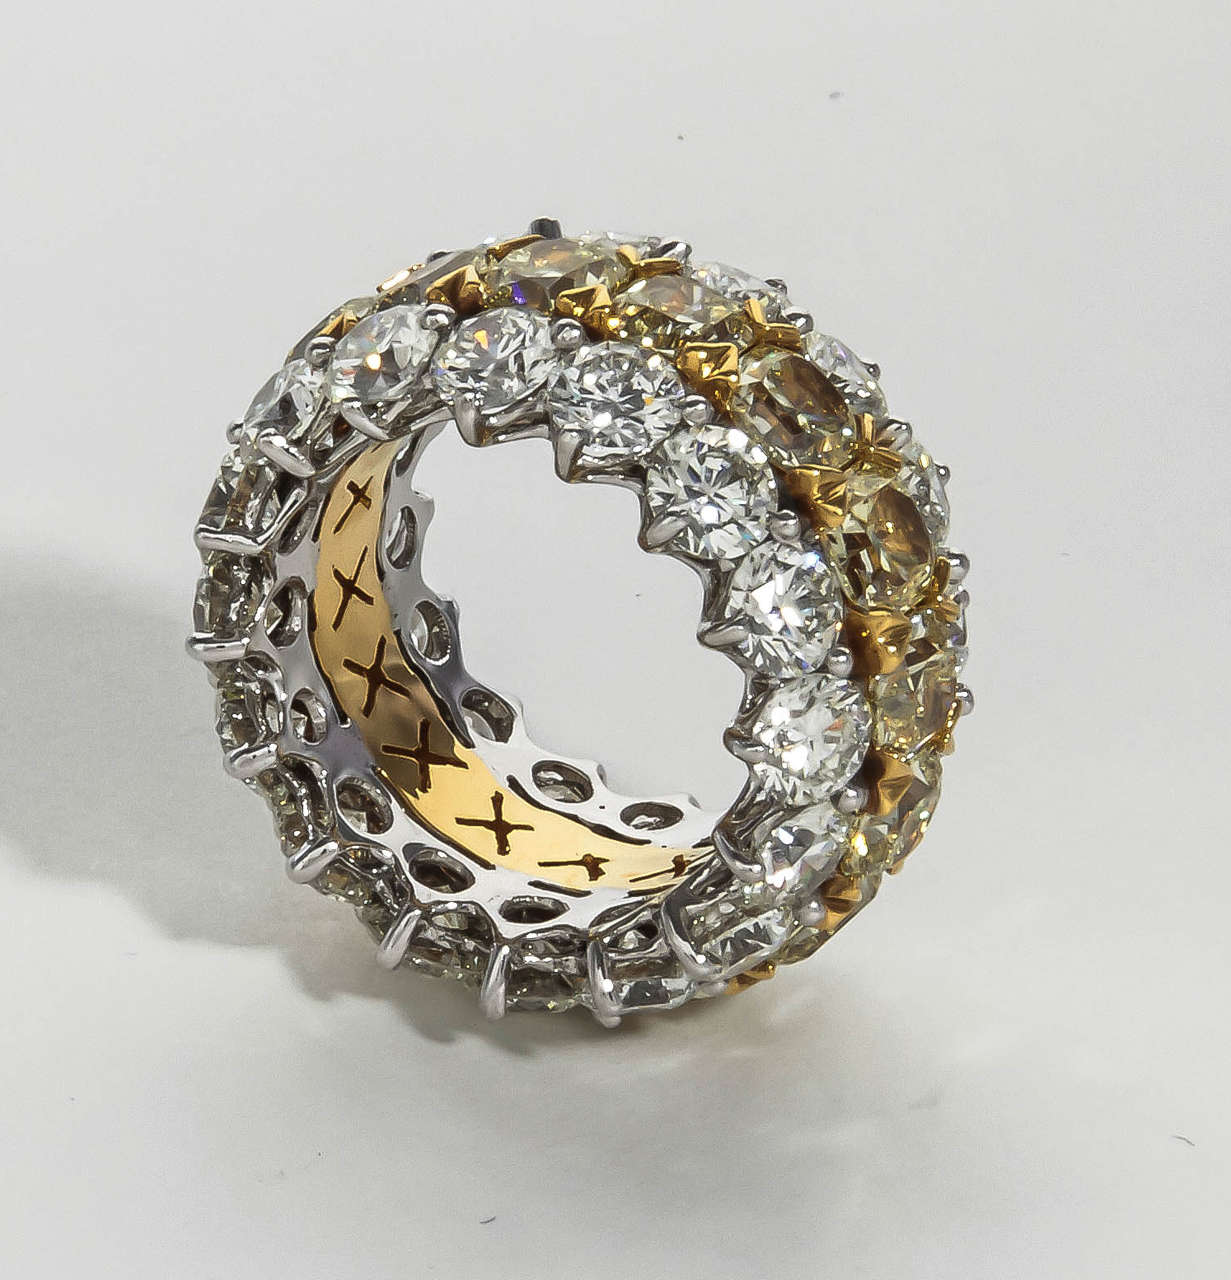 An amazing design. A great ring to add to any collection. 

18.95 carats of yellow and white diamonds!!! 

Handmade in New York, set in platinum and 18k yellow gold.

This ring is a WOW!